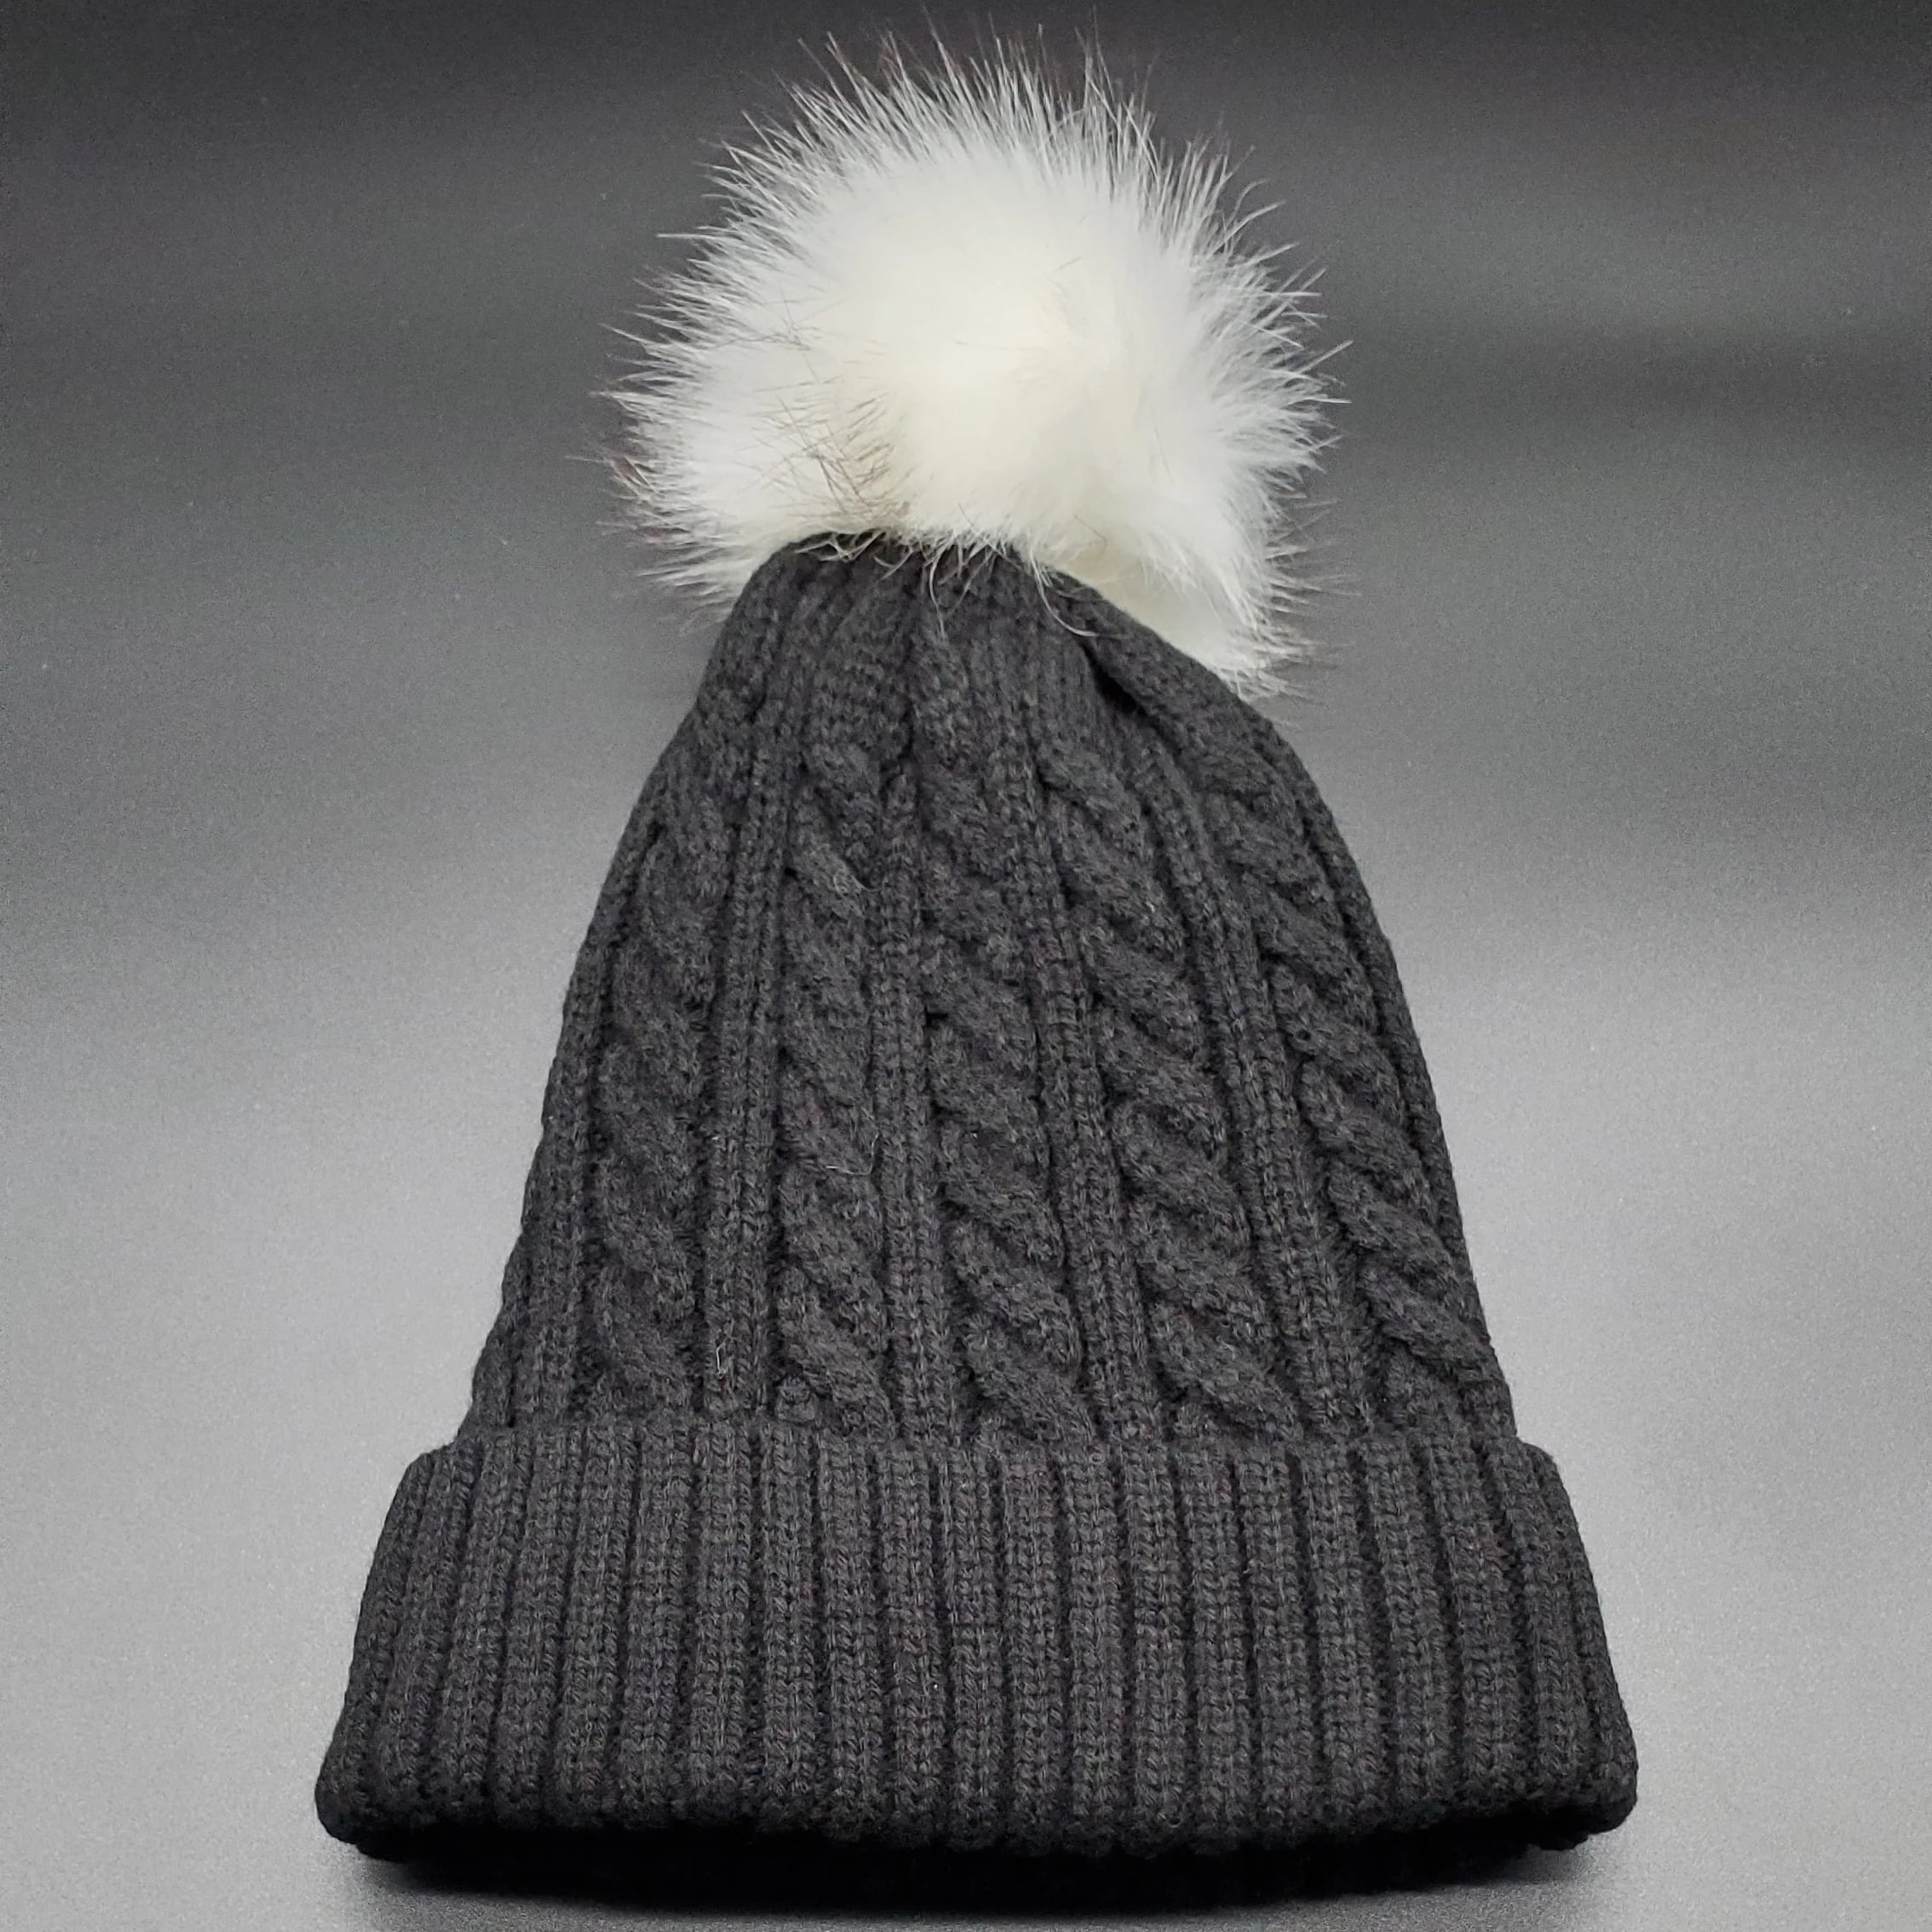 Women’s Polar Extreme Heat Marl Cable Knit Pom Hat